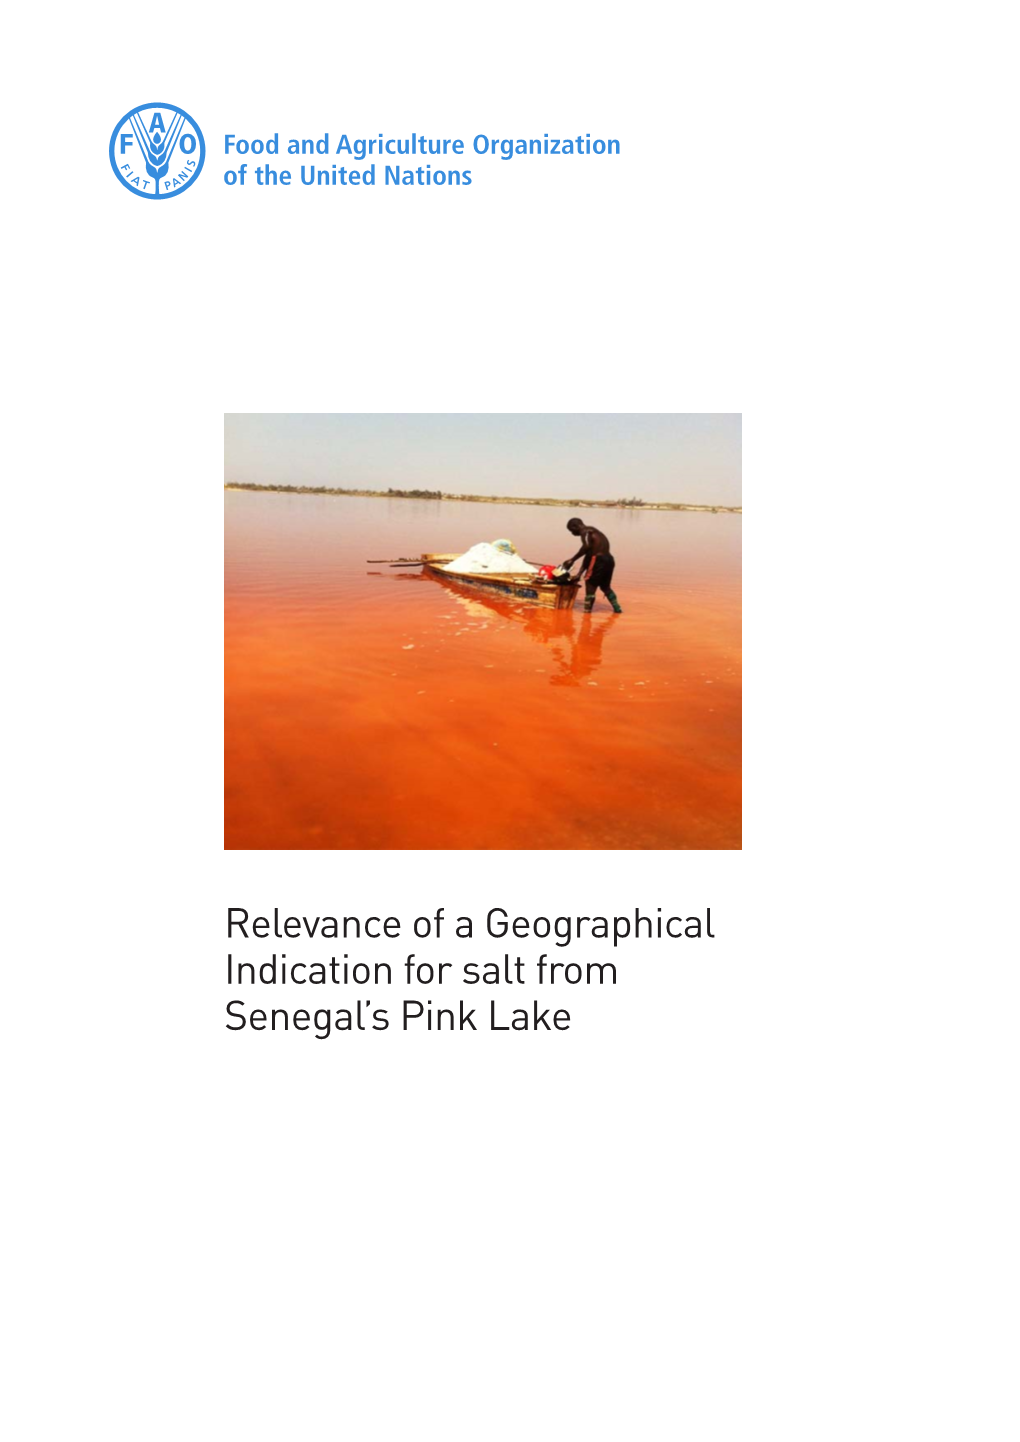 Relevance of a Geographical Indication for Salt from Senegal's